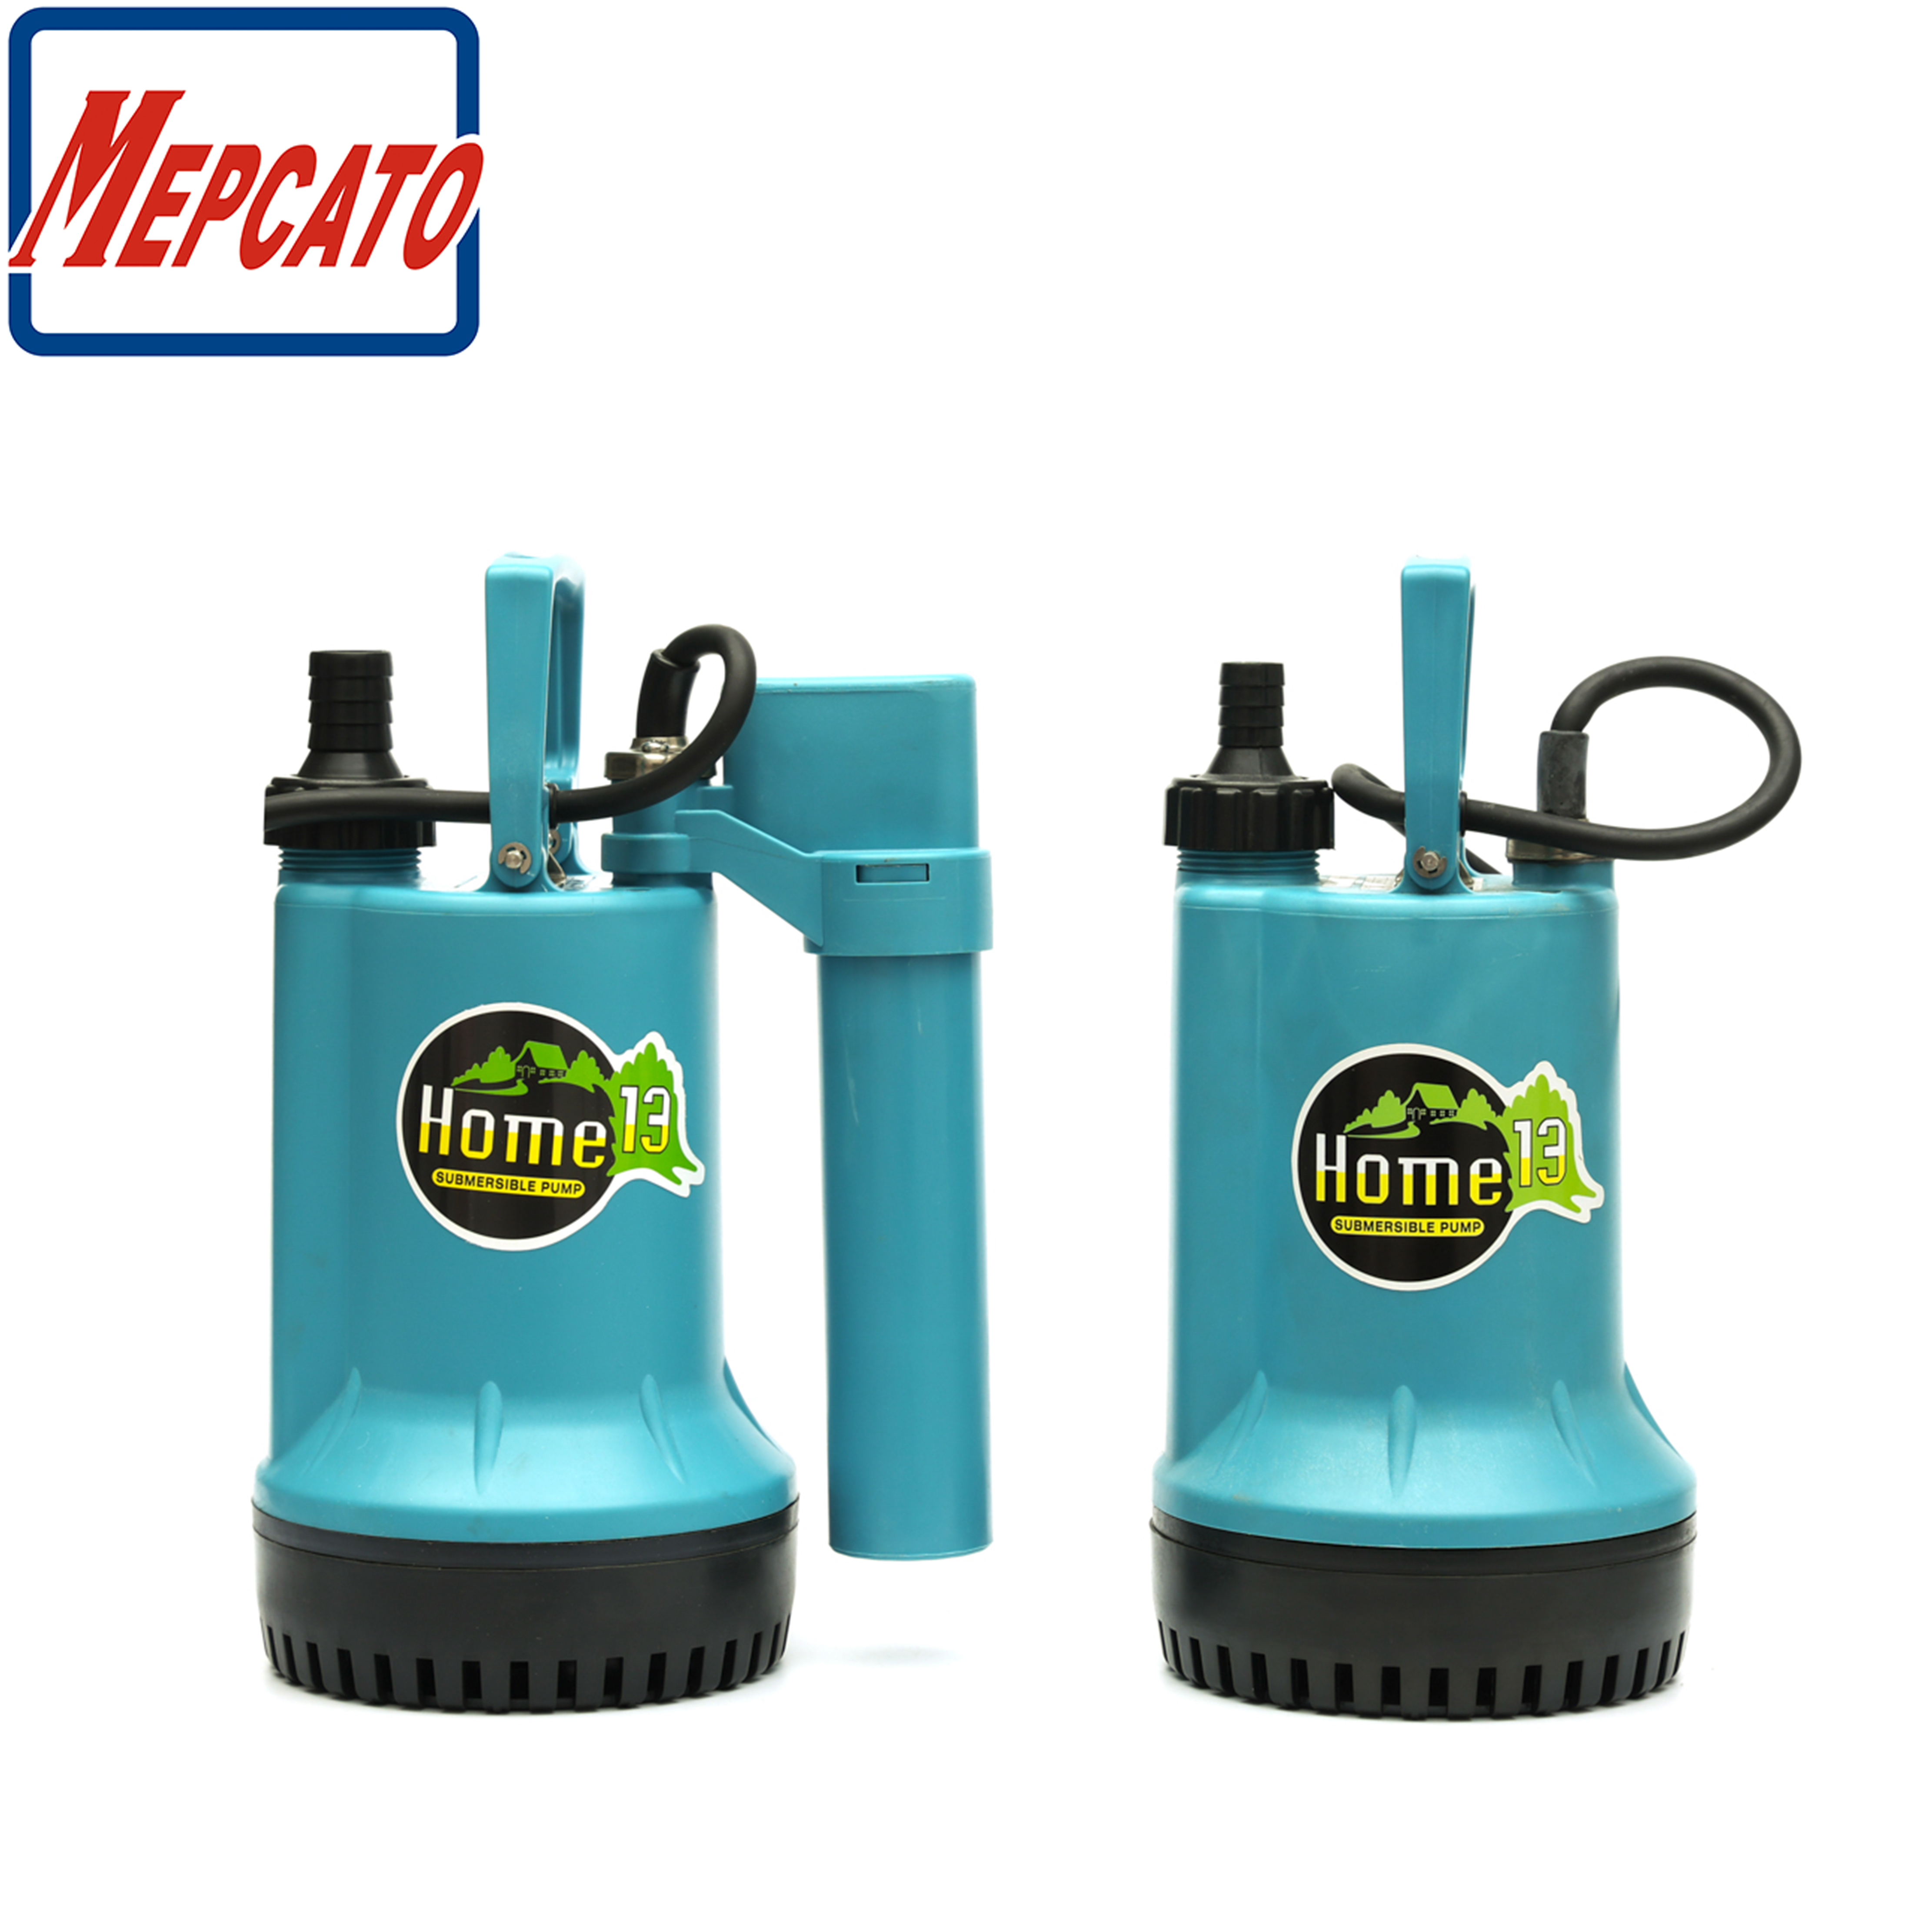 180W Plastic Electric Submersible Dewatering Pump 